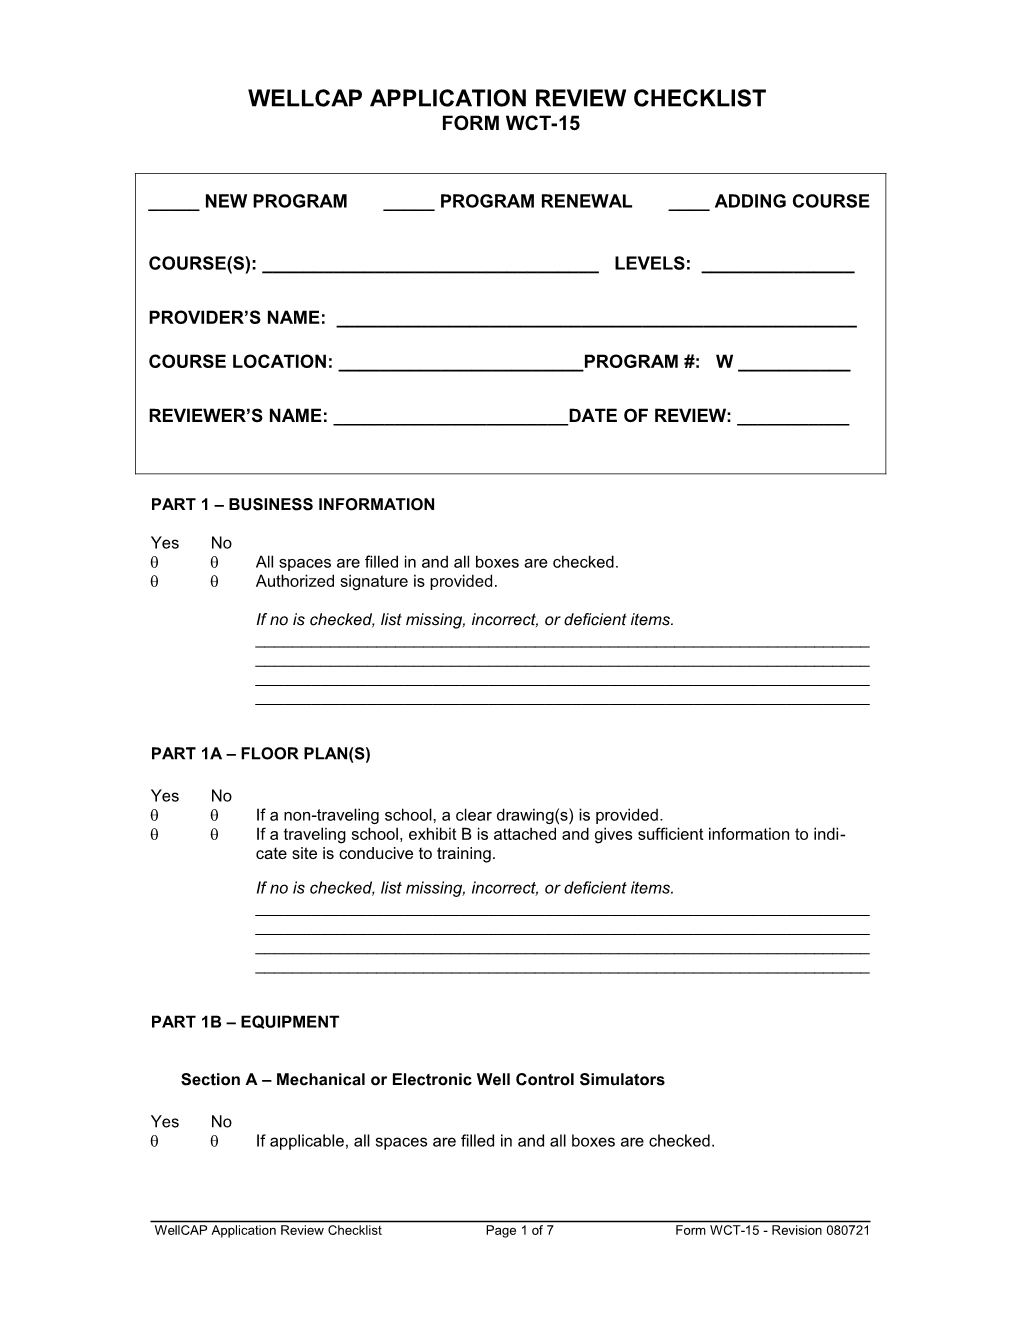 Wellcap Application for Accreditation Form (Wct-3)